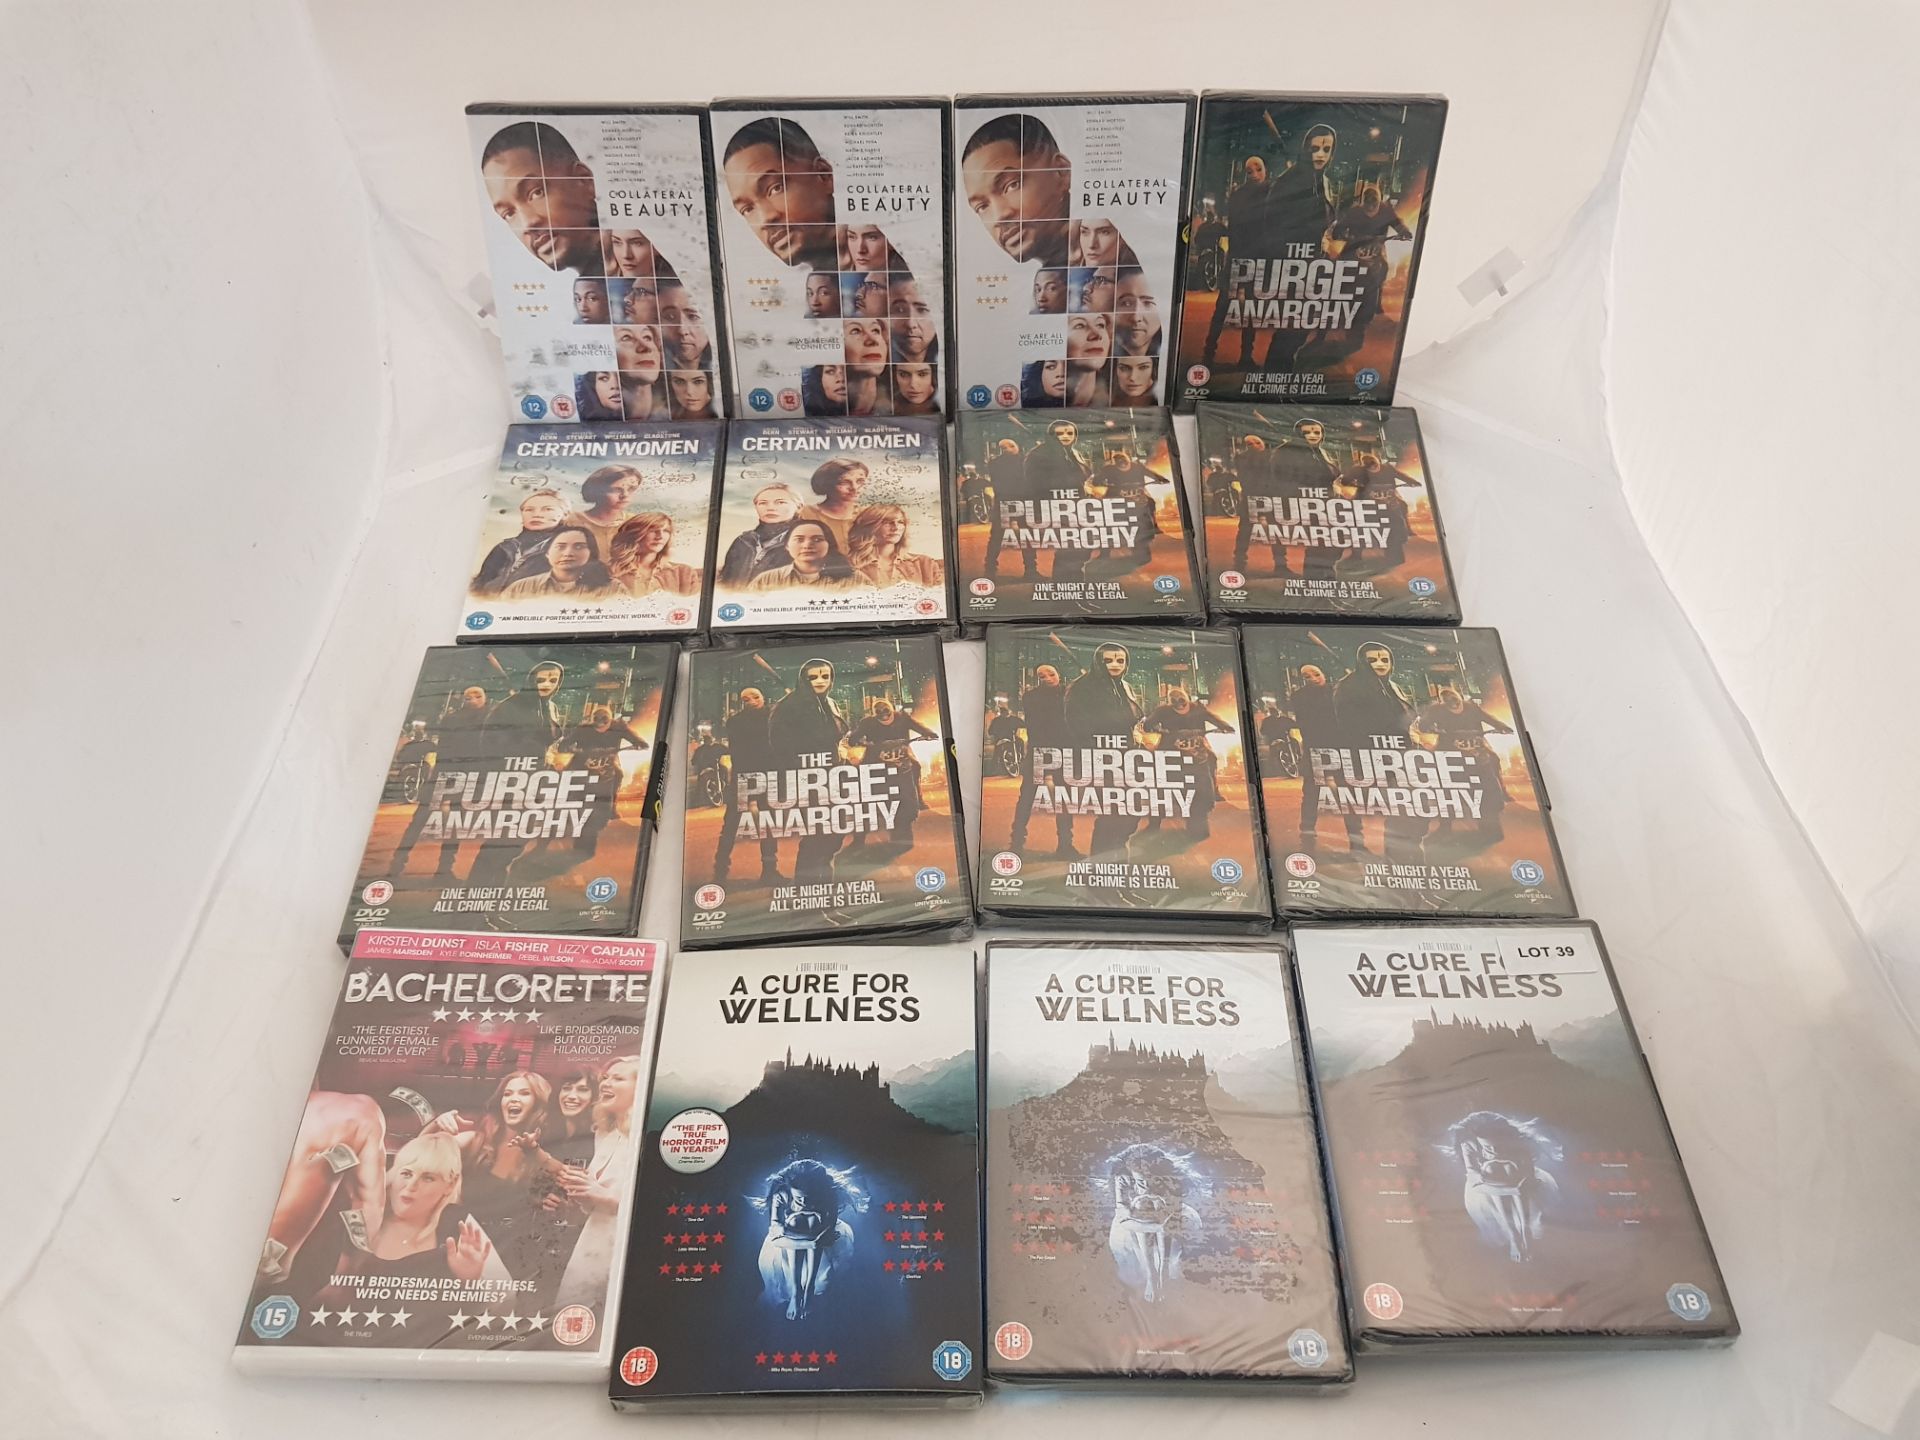 16 x Assorted DVDs to include A Curse for Wellness, The Purge Anarchy, Bachelorette, Certain Wo...